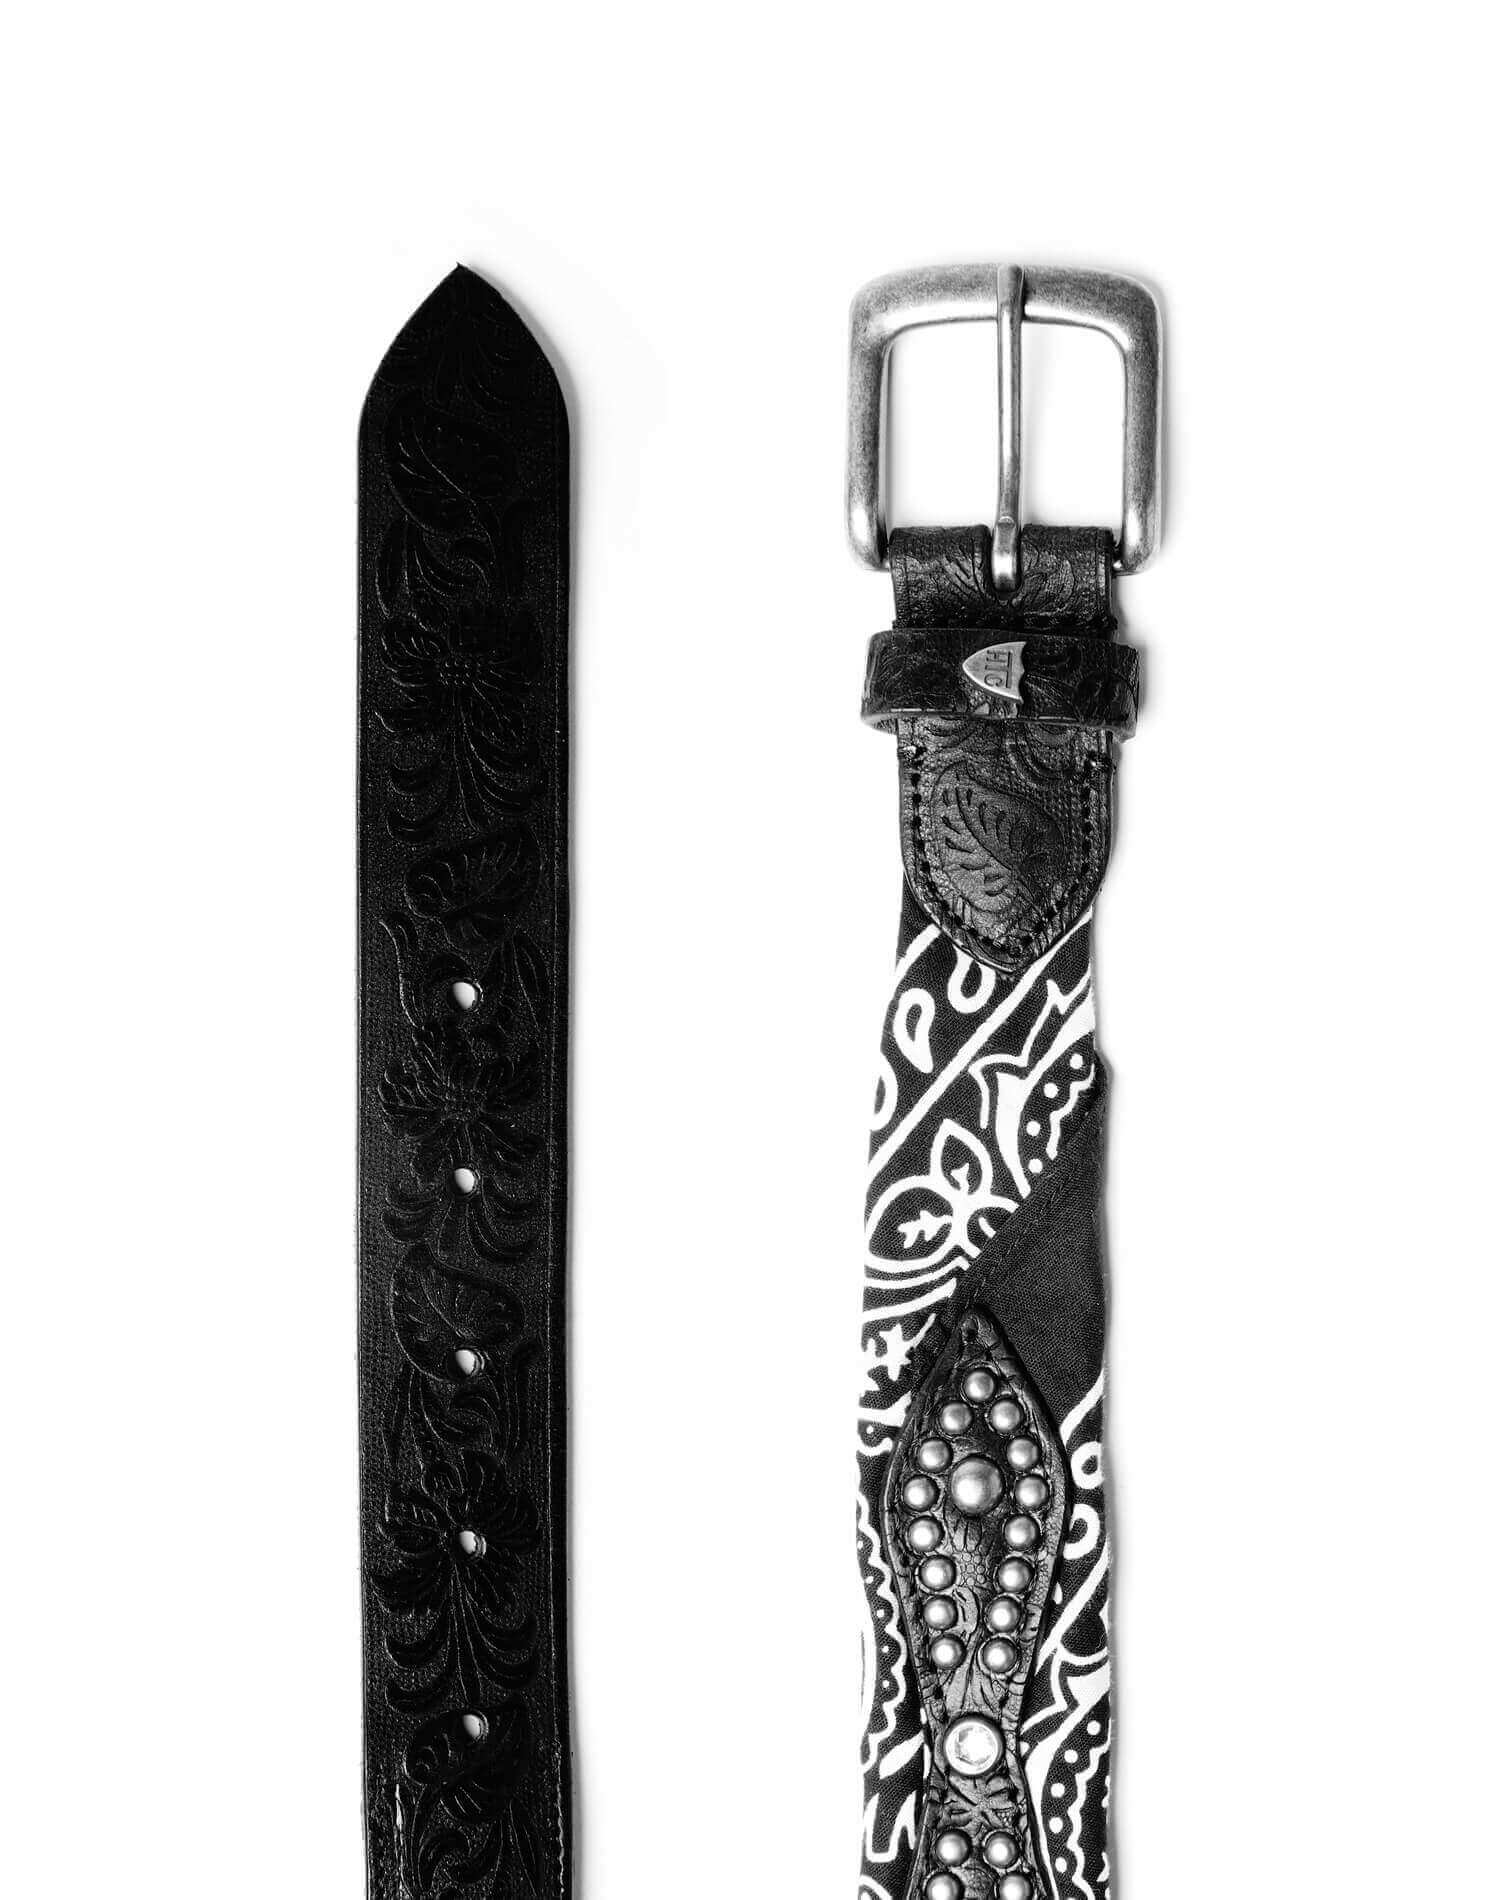 BANDANA BELT Black carved leather belt, paisley black bandana with studs and leather details. Height: 3,5 cm. Made in Italy. HTC LOS ANGELES